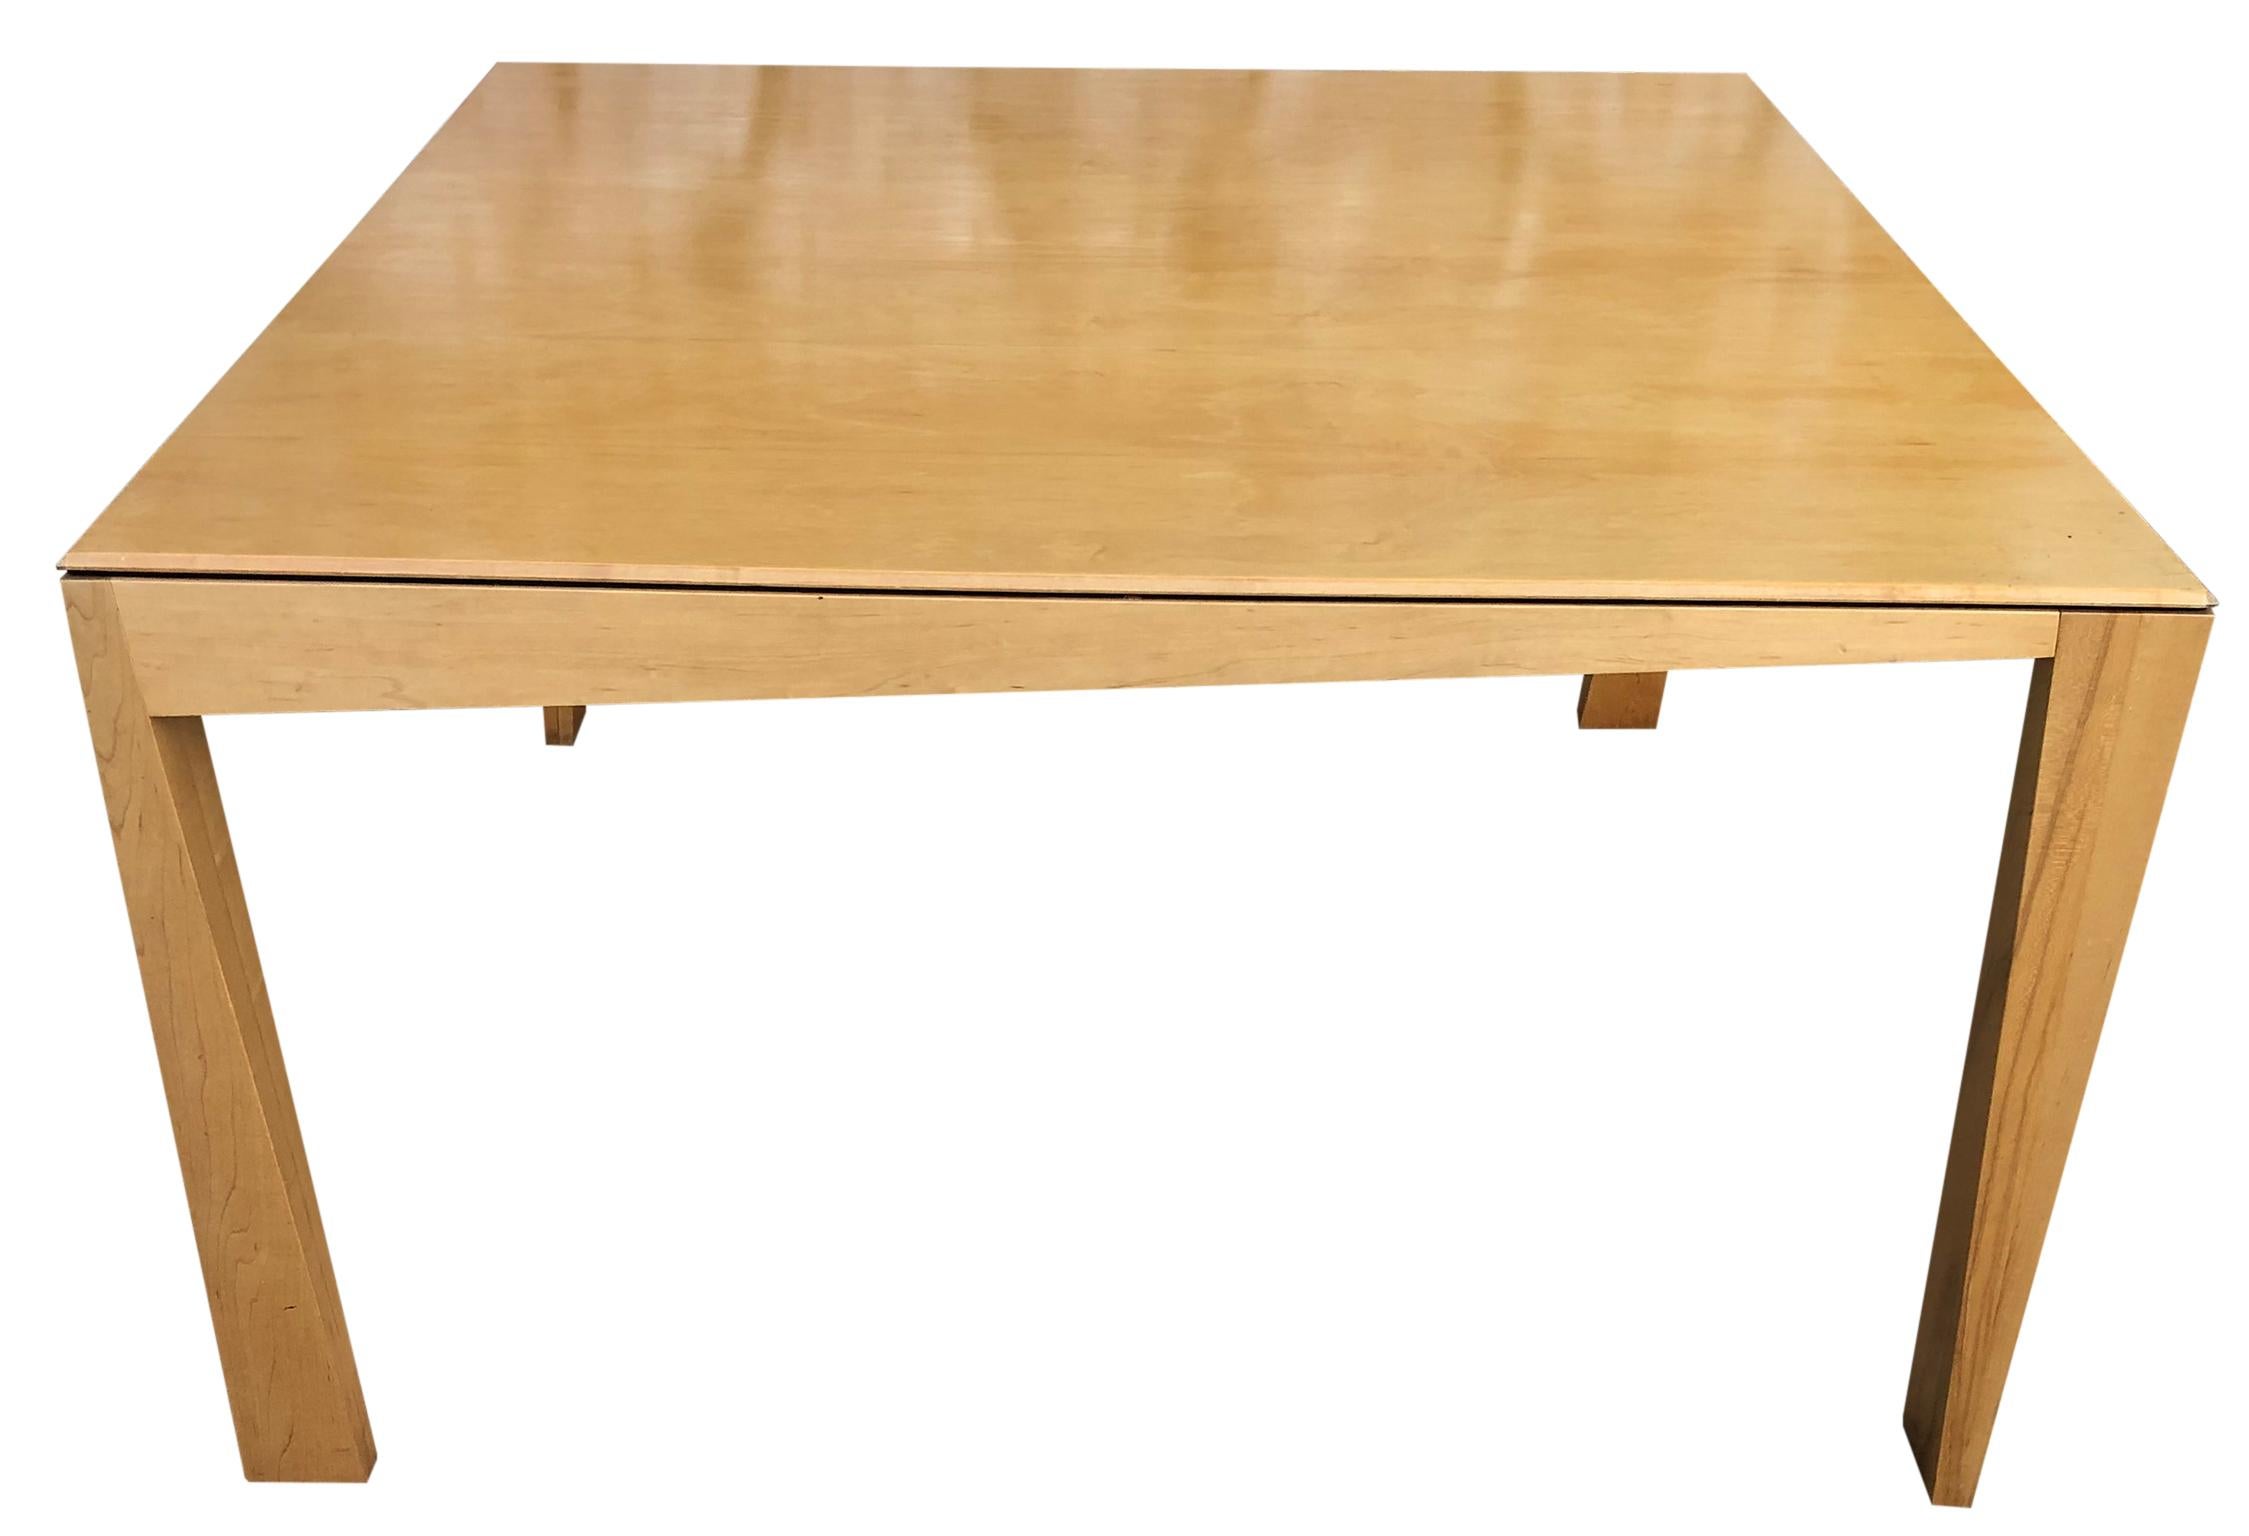 Beautiful 1980s Hennie de Jong square asymmetrical leg maple square dining table blonde maple finish, Sculptural design. Very delicate designed dining table with asymmetrical legs. Solid maple. You are buying (1) dining table. Fits up to 8 chairs.